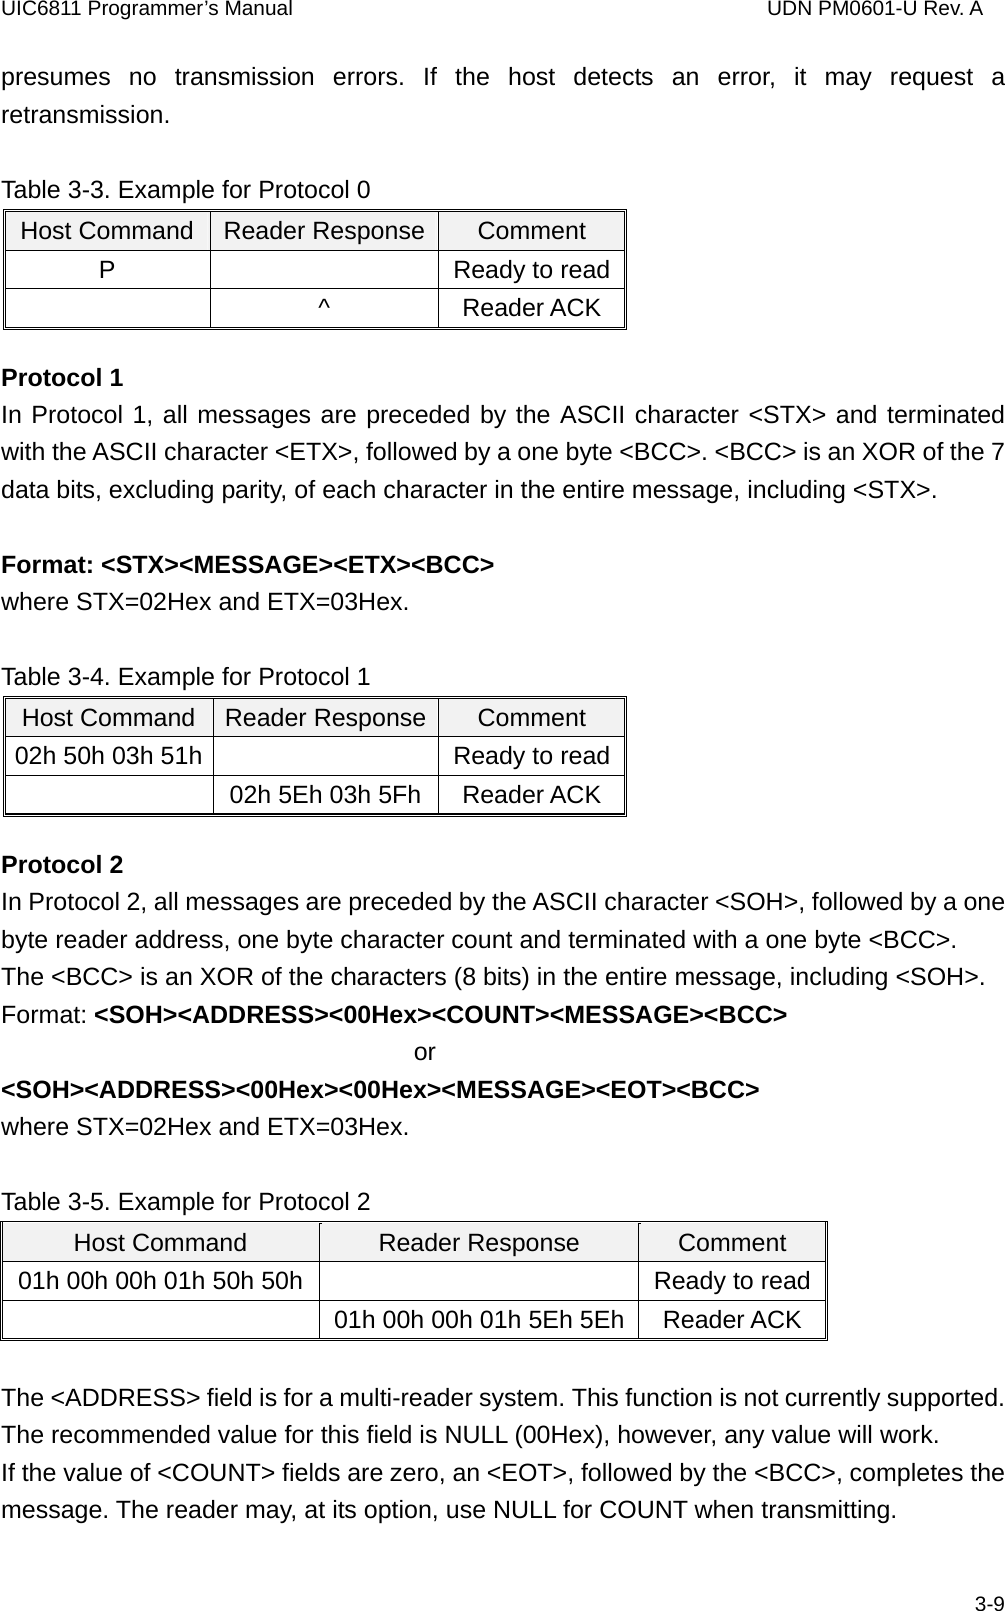 UIC6811 Programmer’s Manual                                  UDN PM0601-U Rev. A presumes no transmission errors. If the host detects an error, it may request a retransmission.  Table 3-3. Example for Protocol 0     Protocol 1 In Protocol 1, all messages are preceded by the ASCII character &lt;STX&gt; and terminated with the ASCII character &lt;ETX&gt;, followed by a one byte &lt;BCC&gt;. &lt;BCC&gt; is an XOR of the 7 data bits, excluding parity, of each character in the entire message, including &lt;STX&gt;.  Format: &lt;STX&gt;&lt;MESSAGE&gt;&lt;ETX&gt;&lt;BCC&gt; where STX=02Hex and ETX=03Hex.  Table 3-4. Example for Protocol 1     Host Command  Reader Response Comment P    Ready to read ^ Reader ACK Host Command  Reader Response Comment 02h 50h 03h 51h    Ready to read  02h 5Eh 03h 5Fh Reader ACK Protocol 2 In Protocol 2, all messages are preceded by the ASCII character &lt;SOH&gt;, followed by a one byte reader address, one byte character count and terminated with a one byte &lt;BCC&gt;. The &lt;BCC&gt; is an XOR of the characters (8 bits) in the entire message, including &lt;SOH&gt;. Format: &lt;SOH&gt;&lt;ADDRESS&gt;&lt;00Hex&gt;&lt;COUNT&gt;&lt;MESSAGE&gt;&lt;BCC&gt;                                  or &lt;SOH&gt;&lt;ADDRESS&gt;&lt;00Hex&gt;&lt;00Hex&gt;&lt;MESSAGE&gt;&lt;EOT&gt;&lt;BCC&gt; where STX=02Hex and ETX=03Hex.  Table 3-5. Example for Protocol 2 Host Command  Reader Response  Comment 01h 00h 00h 01h 50h 50h    Ready to read   01h 00h 00h 01h 5Eh 5Eh Reader ACK  The &lt;ADDRESS&gt; field is for a multi-reader system. This function is not currently supported. The recommended value for this field is NULL (00Hex), however, any value will work. If the value of &lt;COUNT&gt; fields are zero, an &lt;EOT&gt;, followed by the &lt;BCC&gt;, completes the message. The reader may, at its option, use NULL for COUNT when transmitting.   3-9